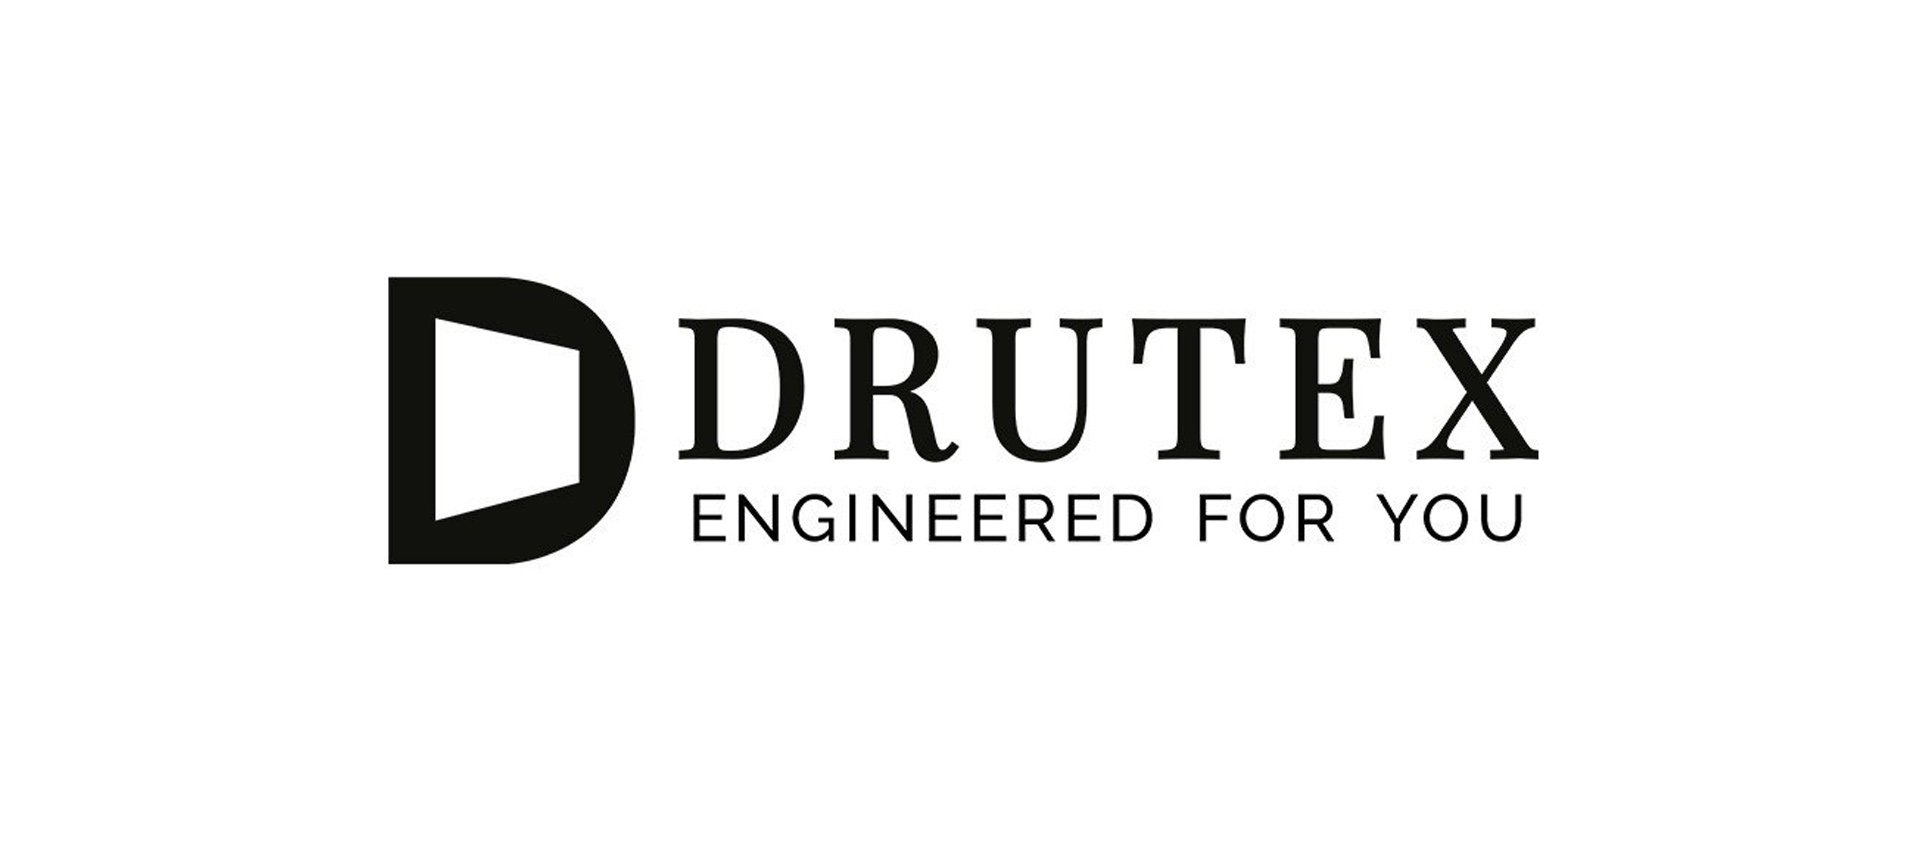 DRUTEX refreshes its image and presents a new logo